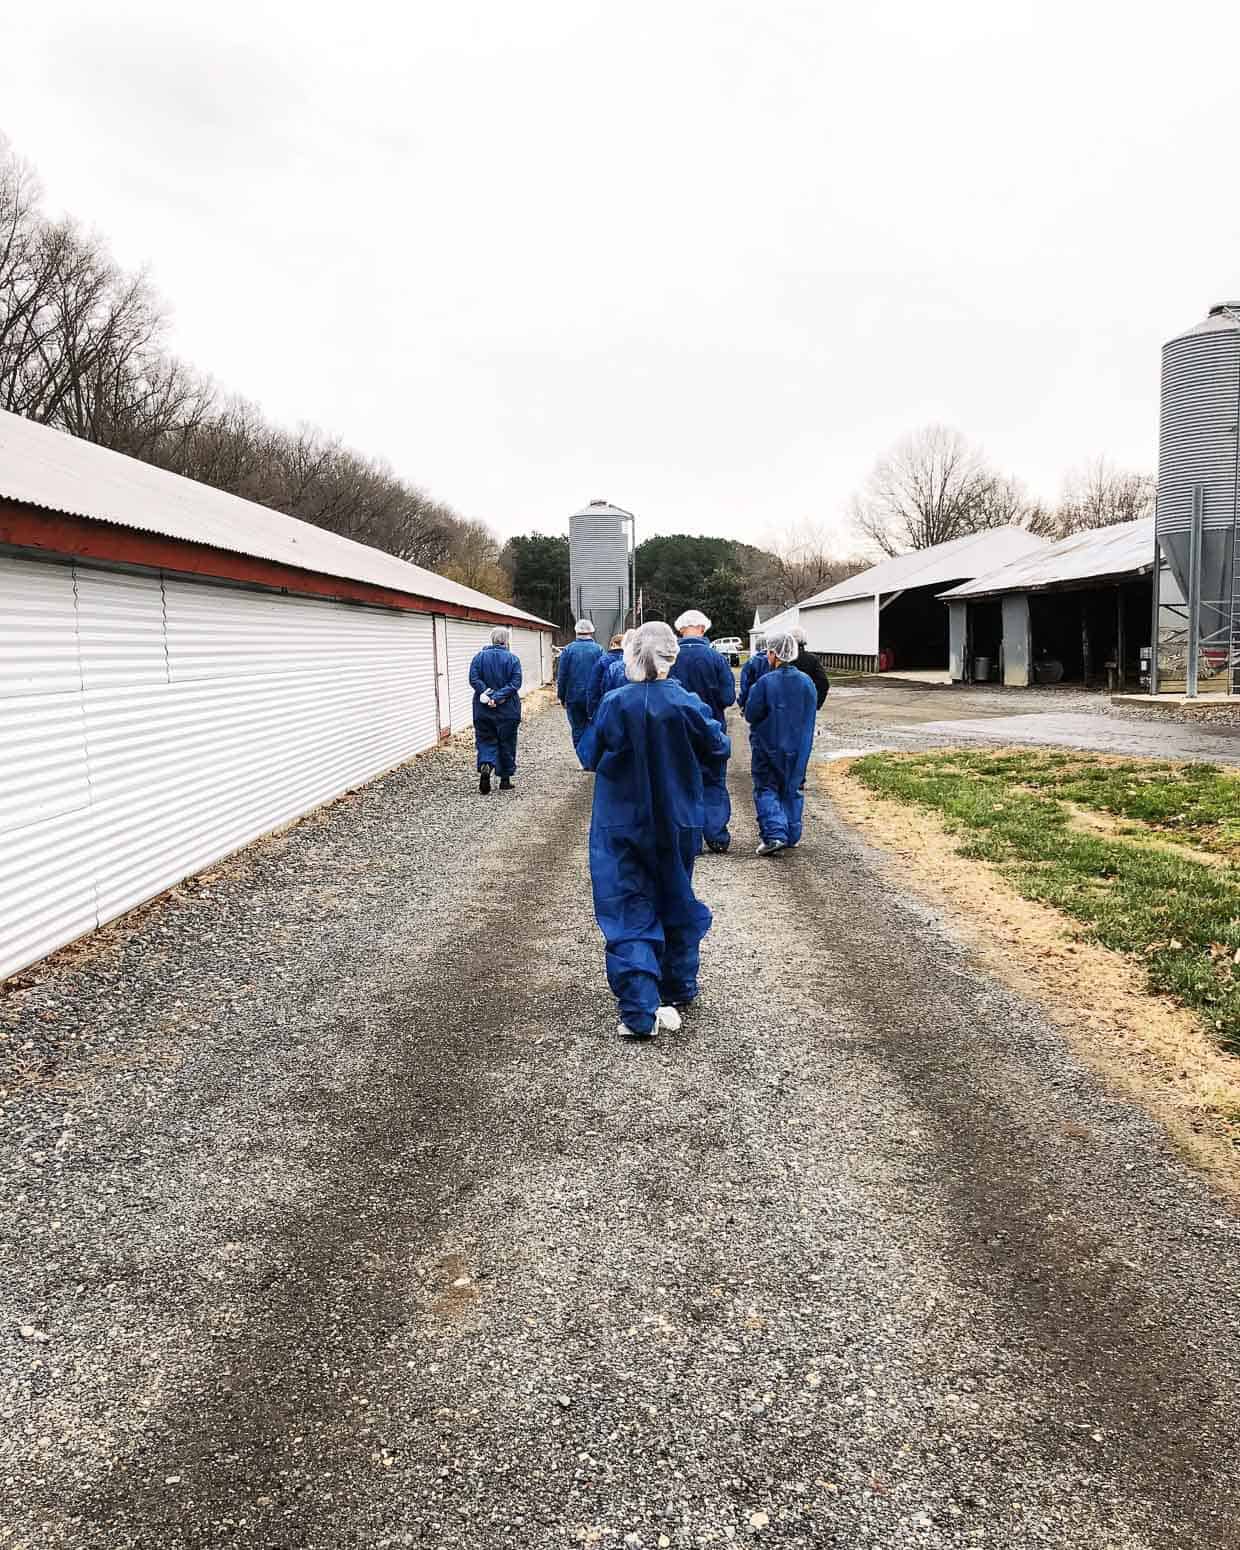 What it’s like at a chicken farm in the U.S.? Learn how farmers & the National Chicken Council are working hard to provide safe, healthy, sustainable food. #sponsored